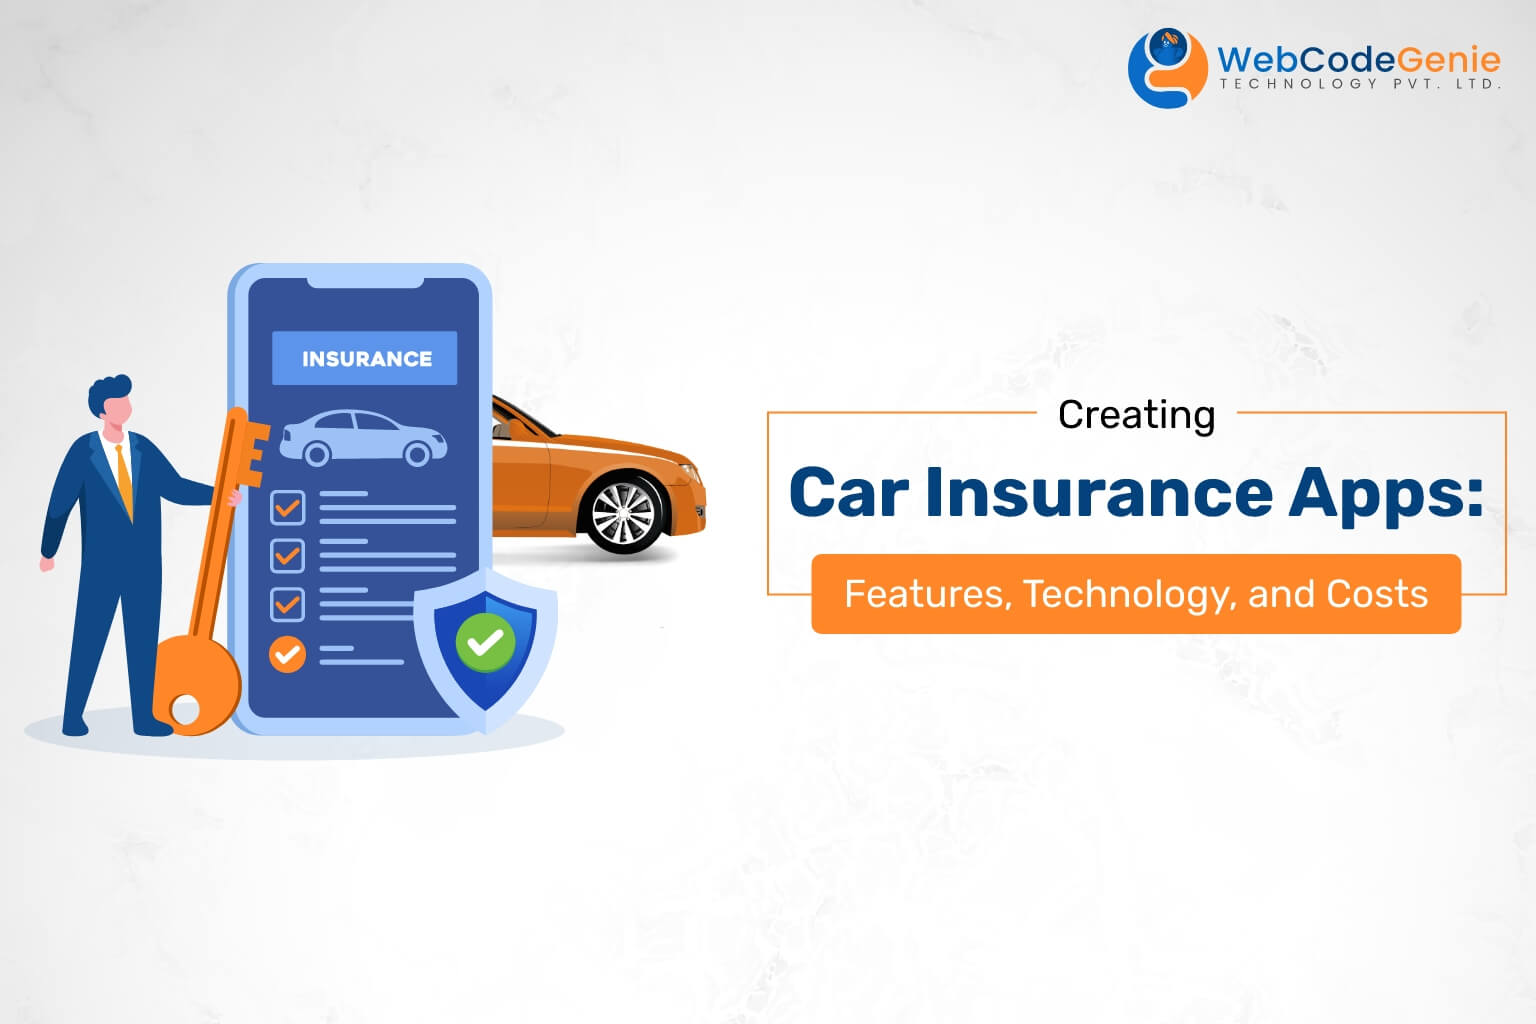 Creating Car Insurance Apps Features, Technology, and Costs